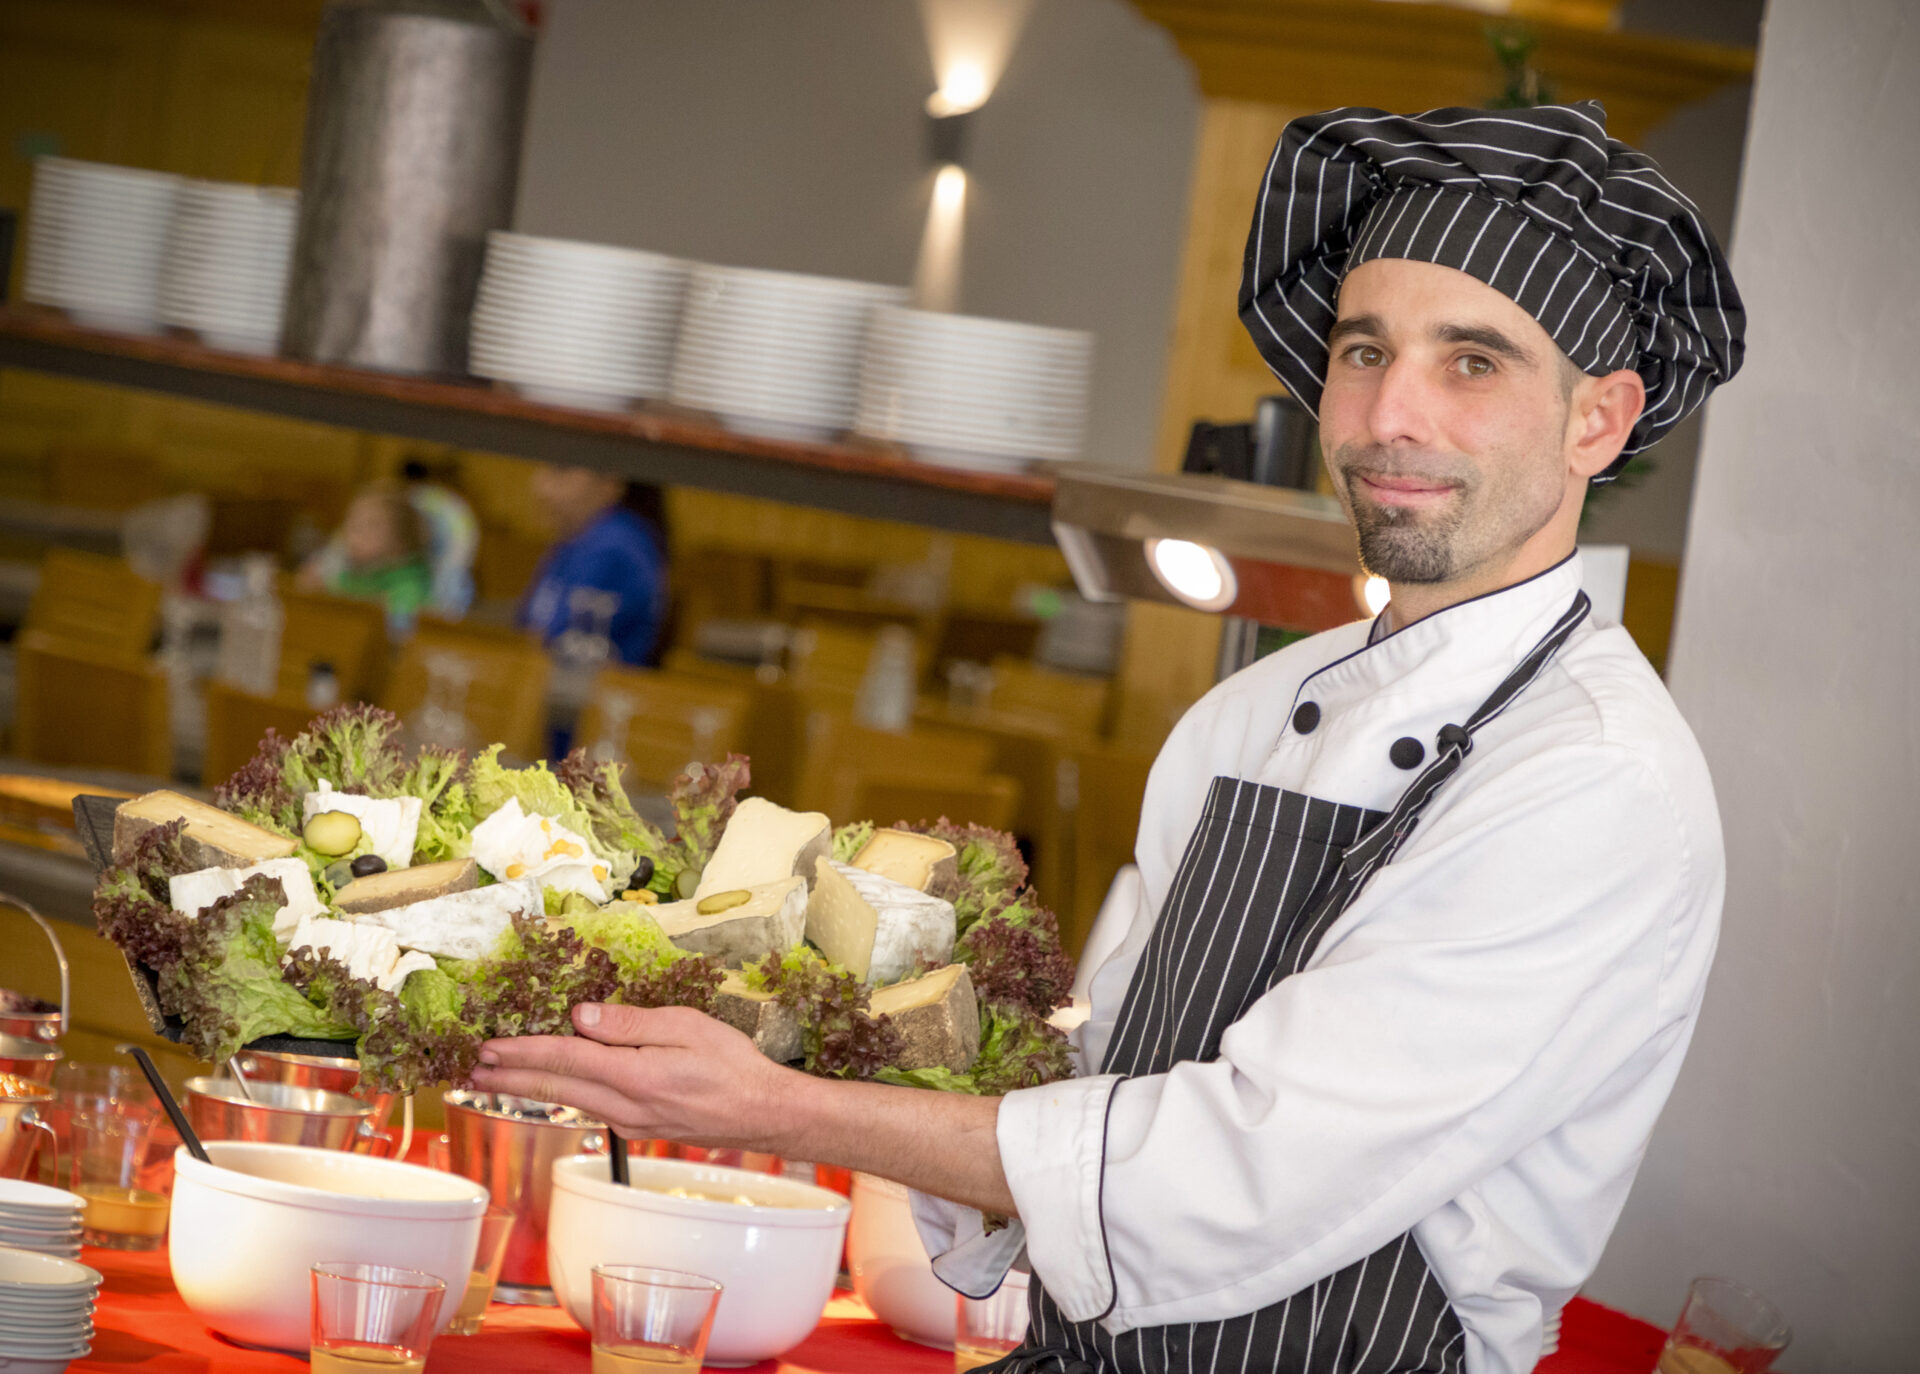 An image of the chef next to the buffet in the restaurant